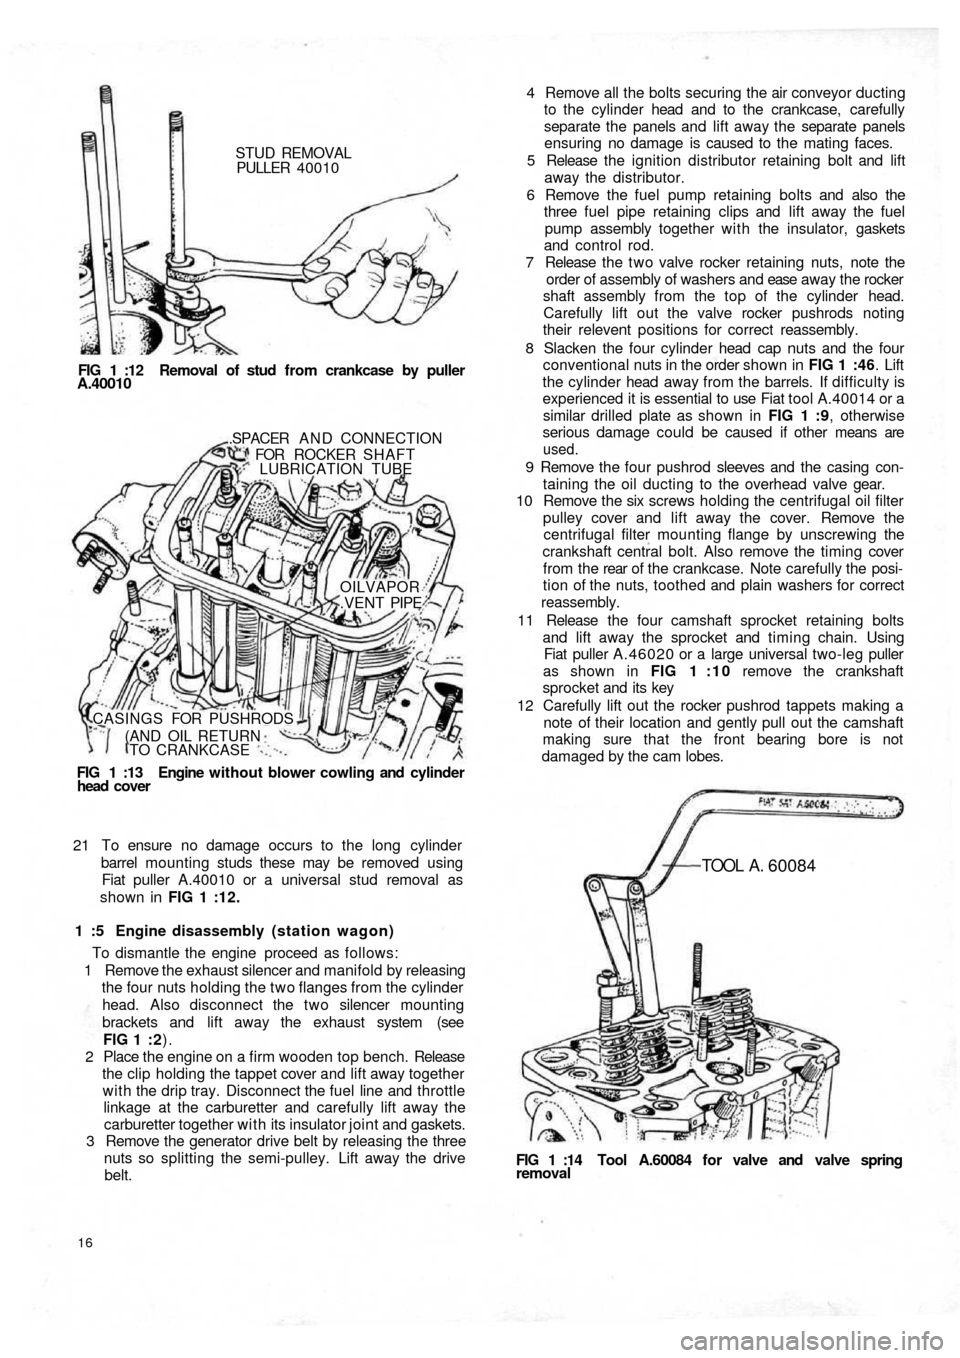 FIAT 500 1968 1.G Workshop Manual STUD REMOVAL
PULLER  40010
FIG 1 :12  Removal of stud from crankcase by puller
A.40010
FIG  1  :13   Engine  without blower cowling and cylinder
head  cover.SPACER  A N D  CONNECTION
FOR ROCKER SHAFT
